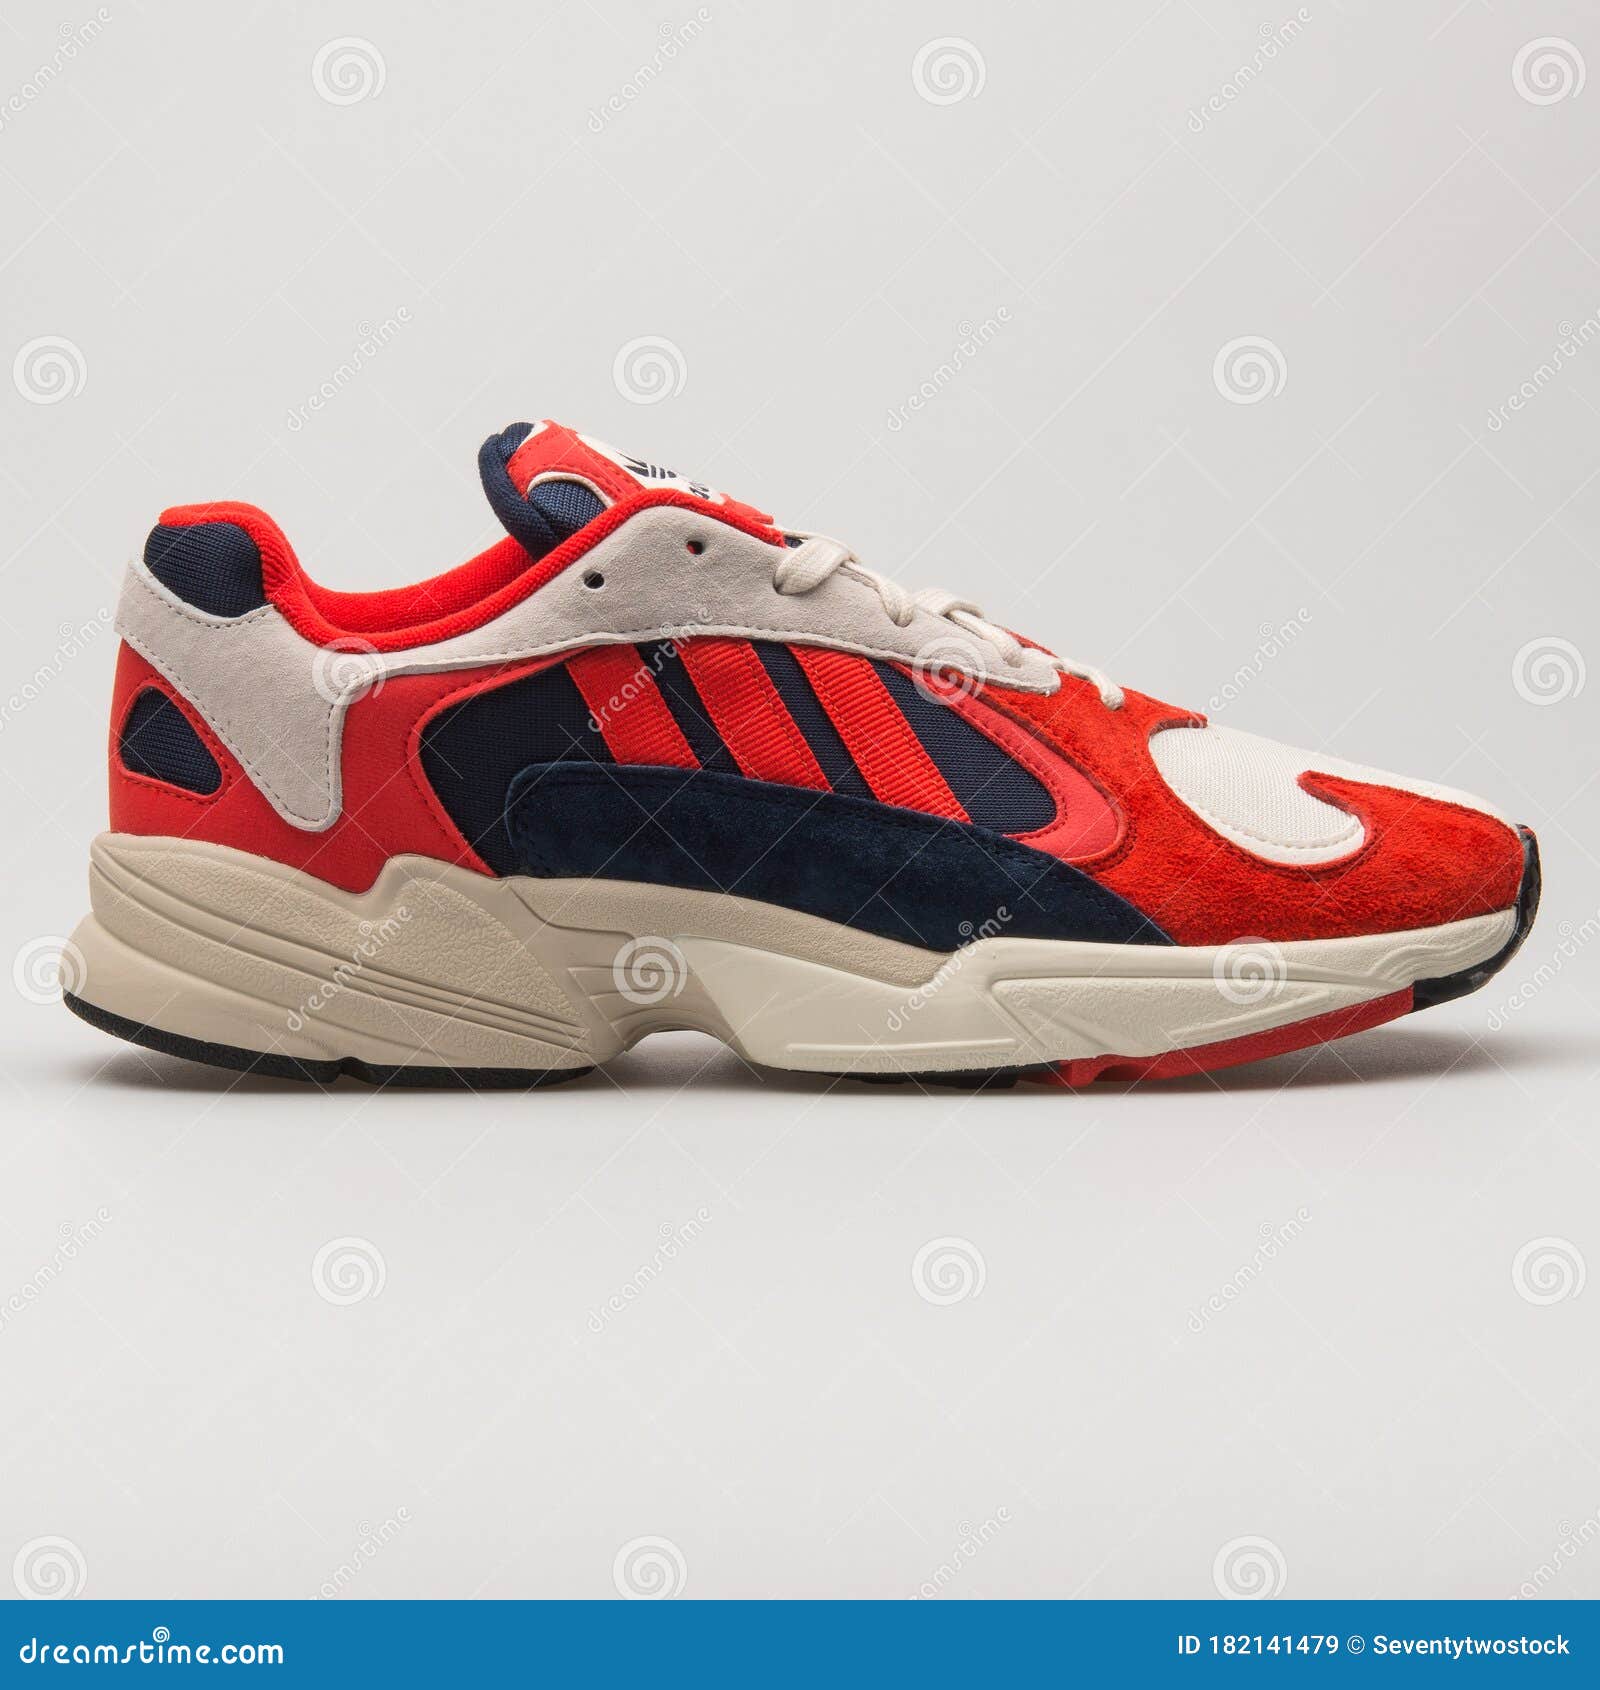 Adidas Yung 1 Red, Black, Navy Blue and Beige Sneaker Editorial Image - Image of item: 182141479